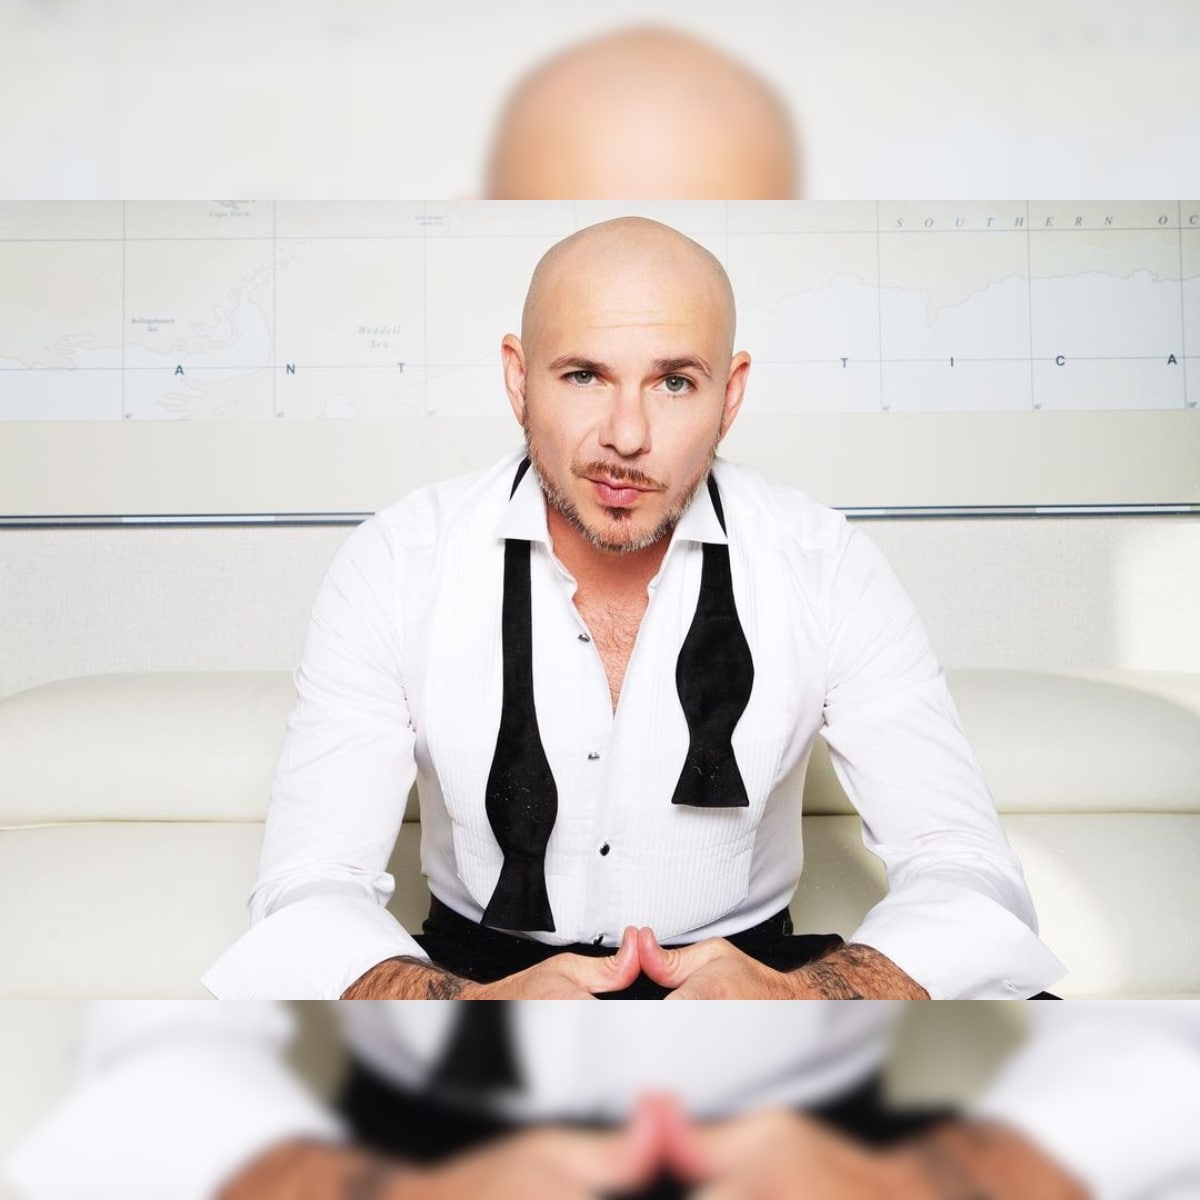 Happy Birthday Pitbull: American Rapper's Popular Collaborations with  Indian Artistes